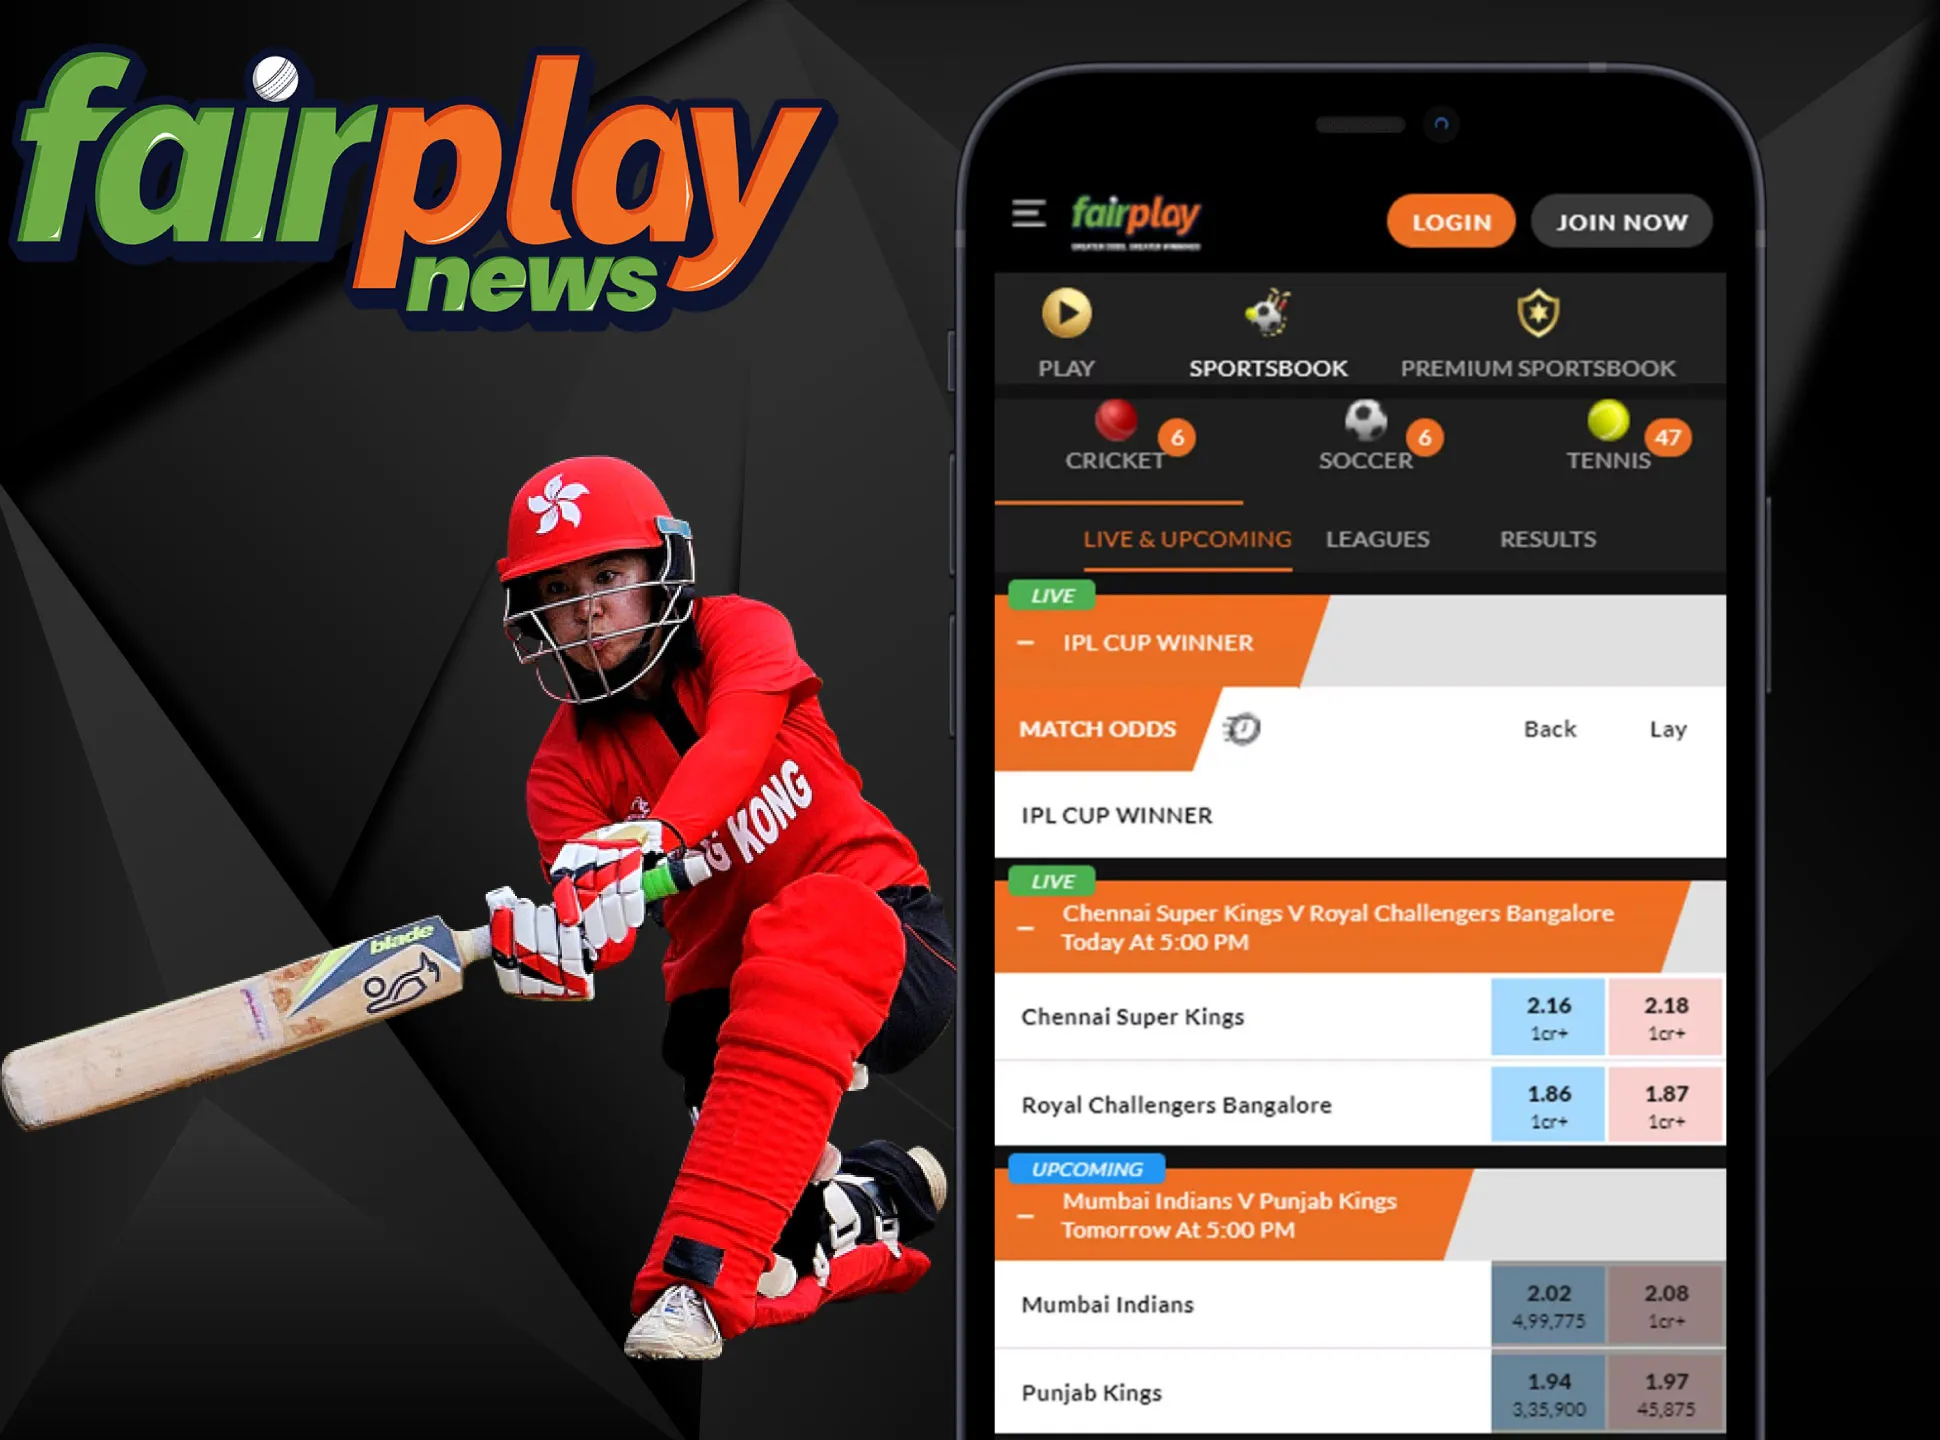 Install the Fairplay app to place bets via smartphone.